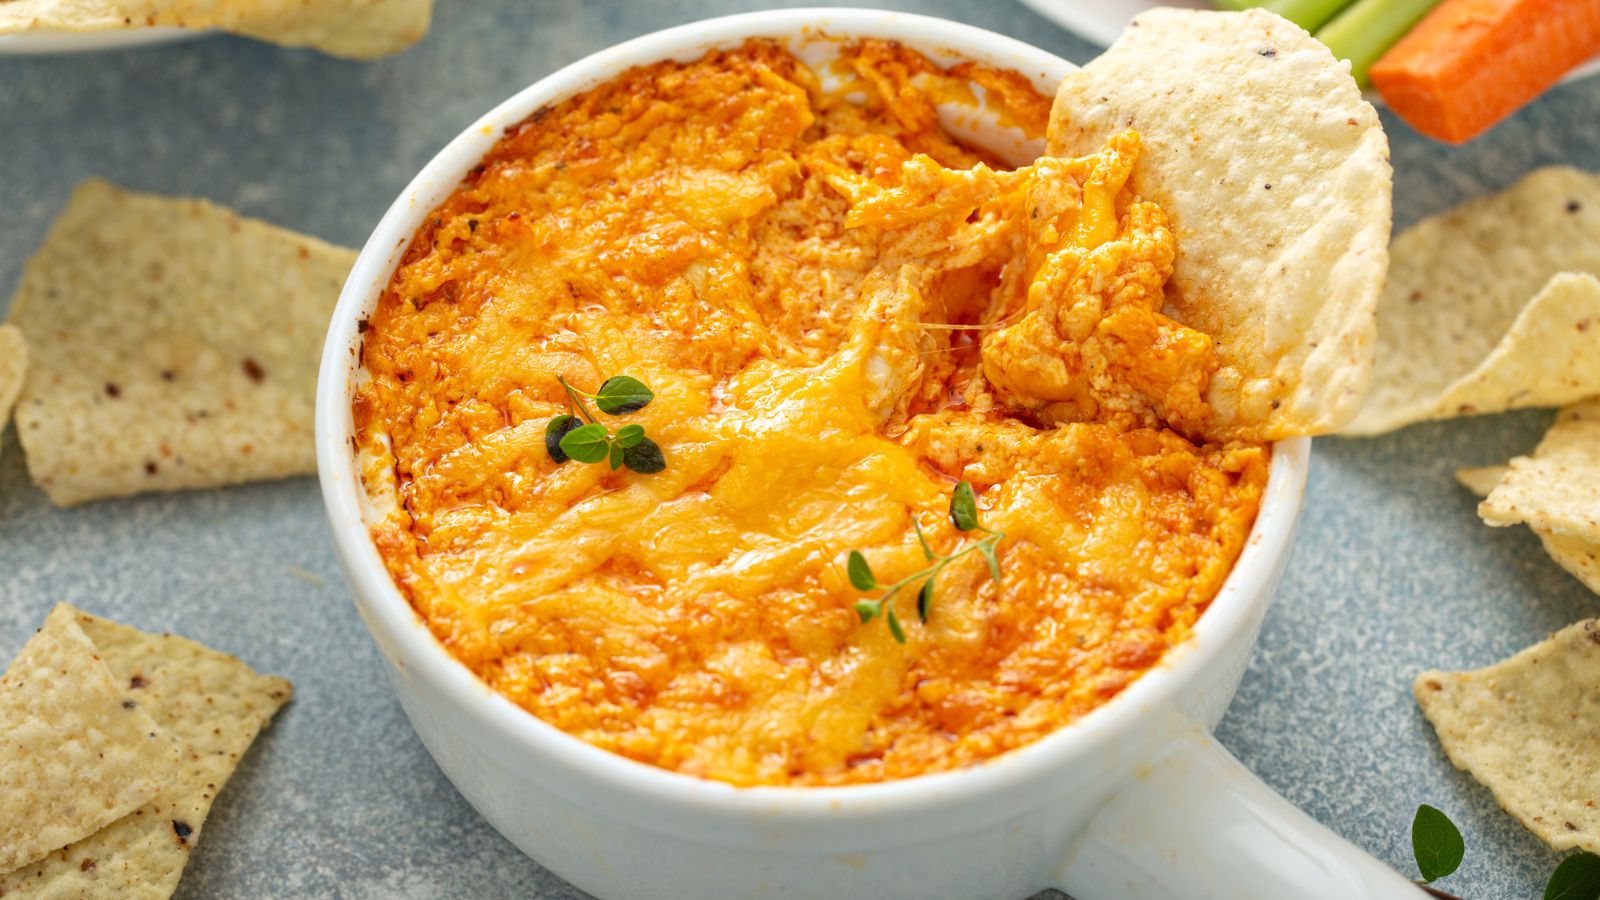 20 Super Bowl Foods No One Can Resist on Game Day